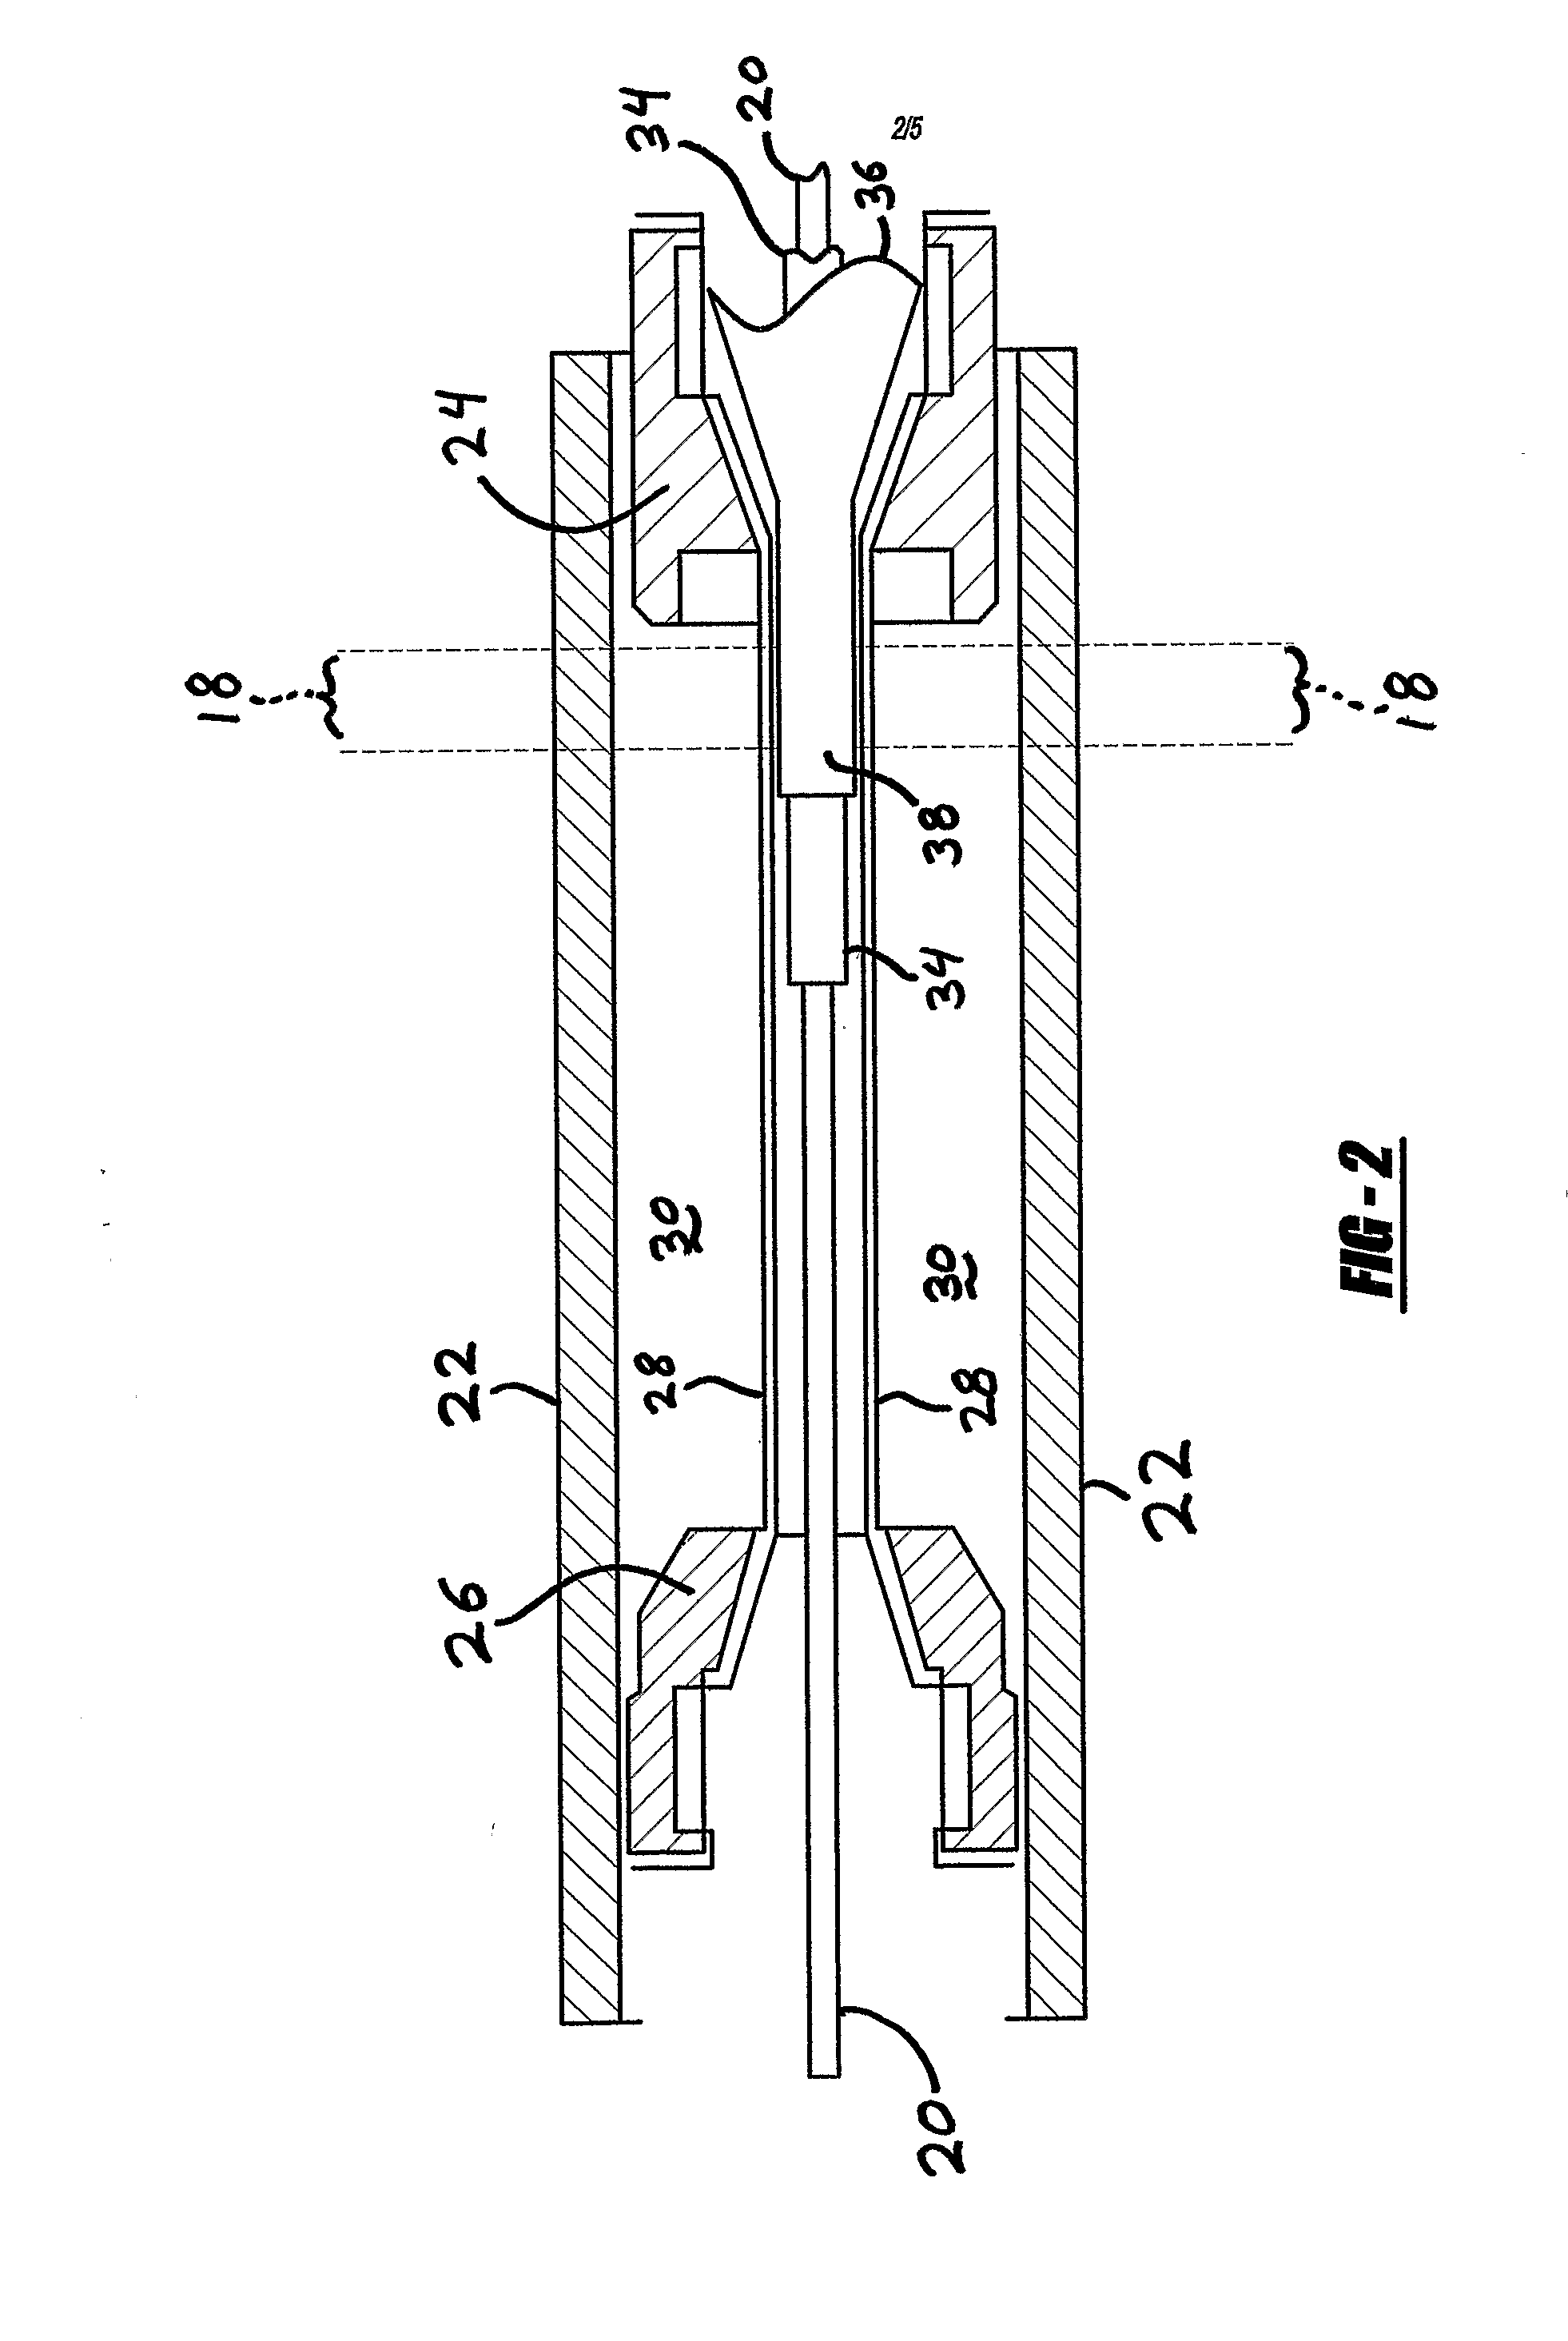 Systems and Methods for Laser Bonding Catheter Components